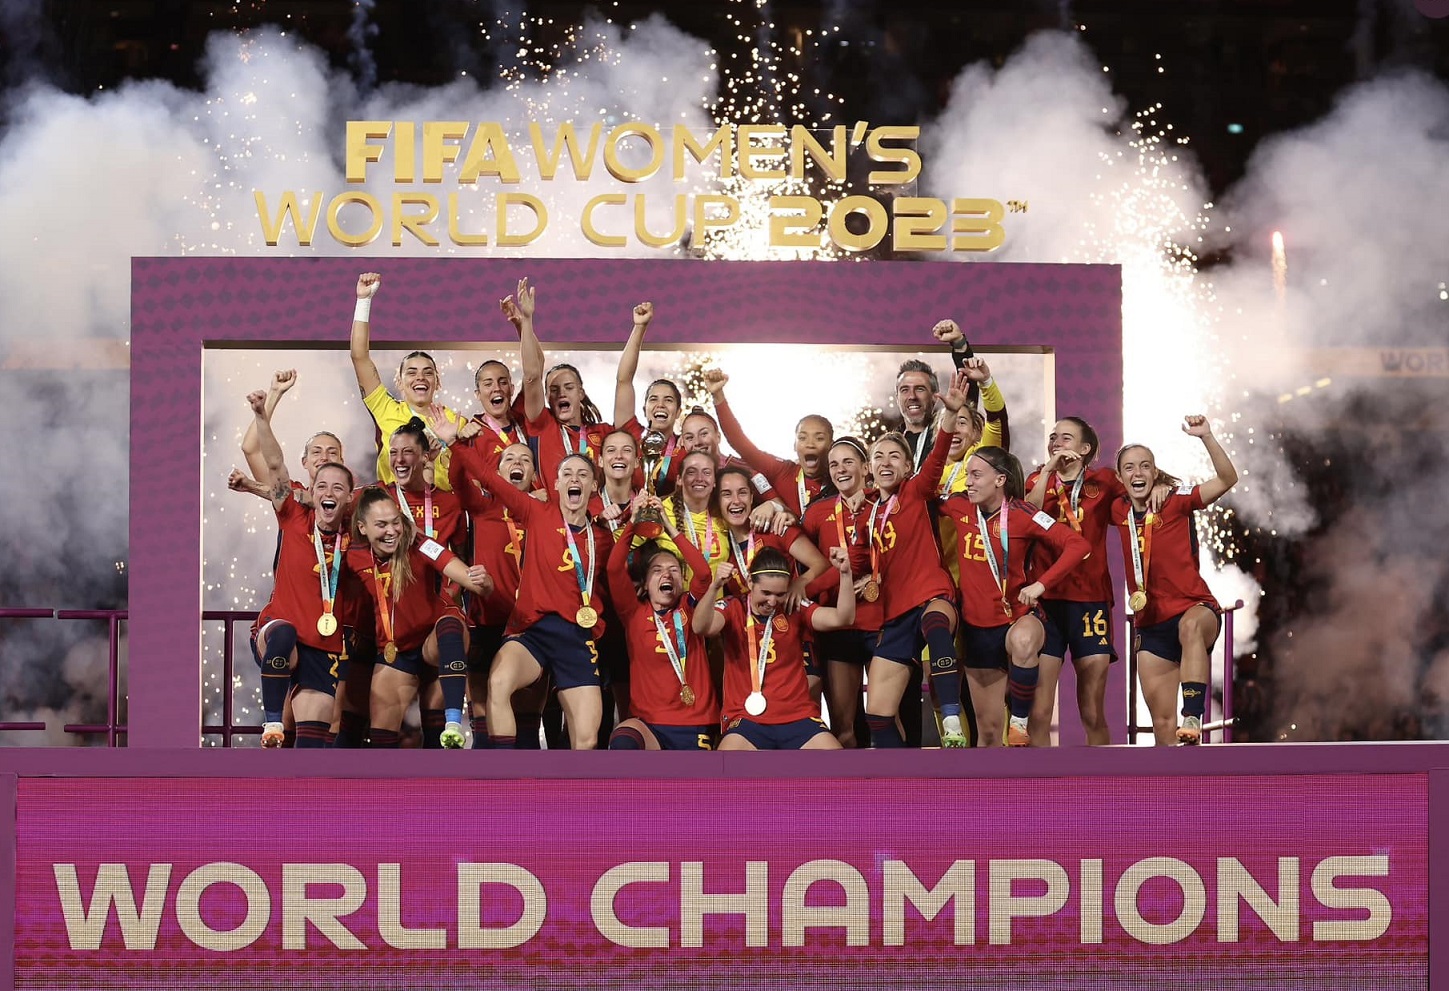 Spain won the Women’s World Cup